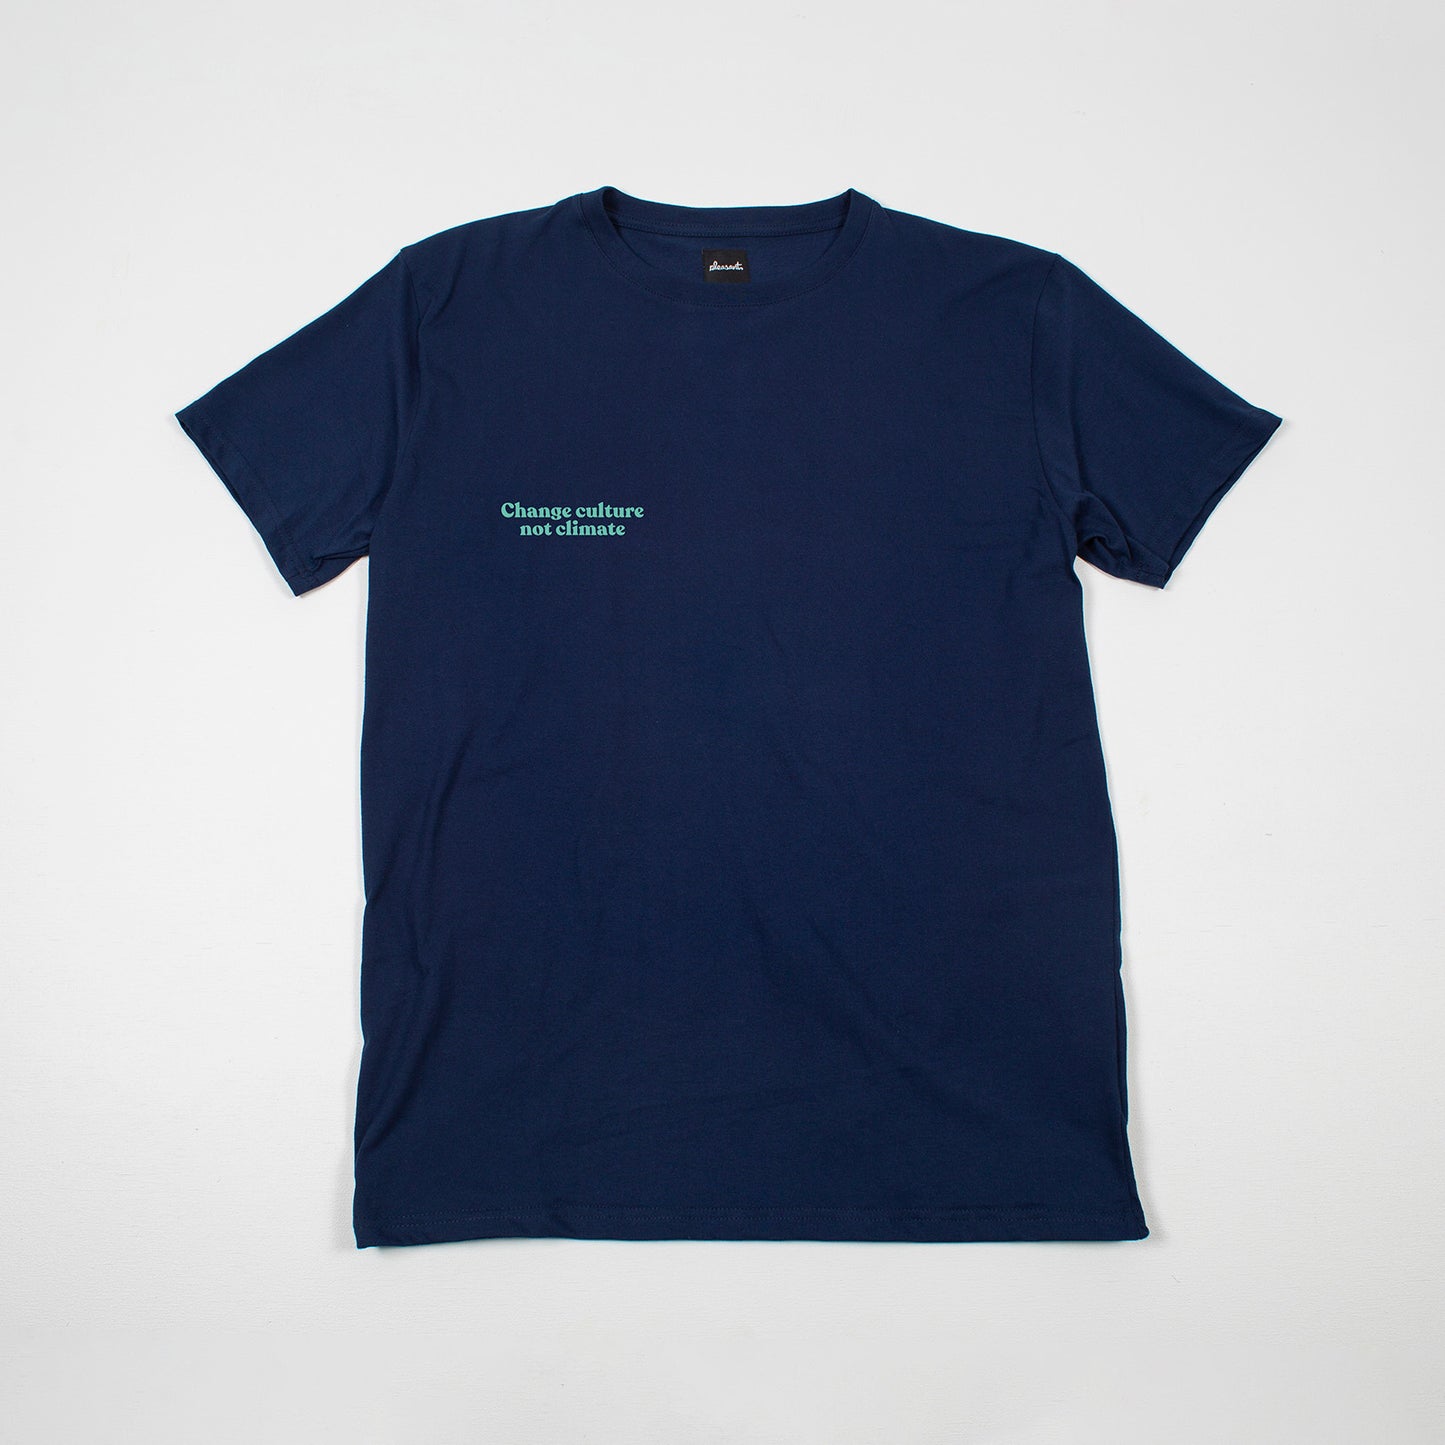 Change culture not climate navy tee